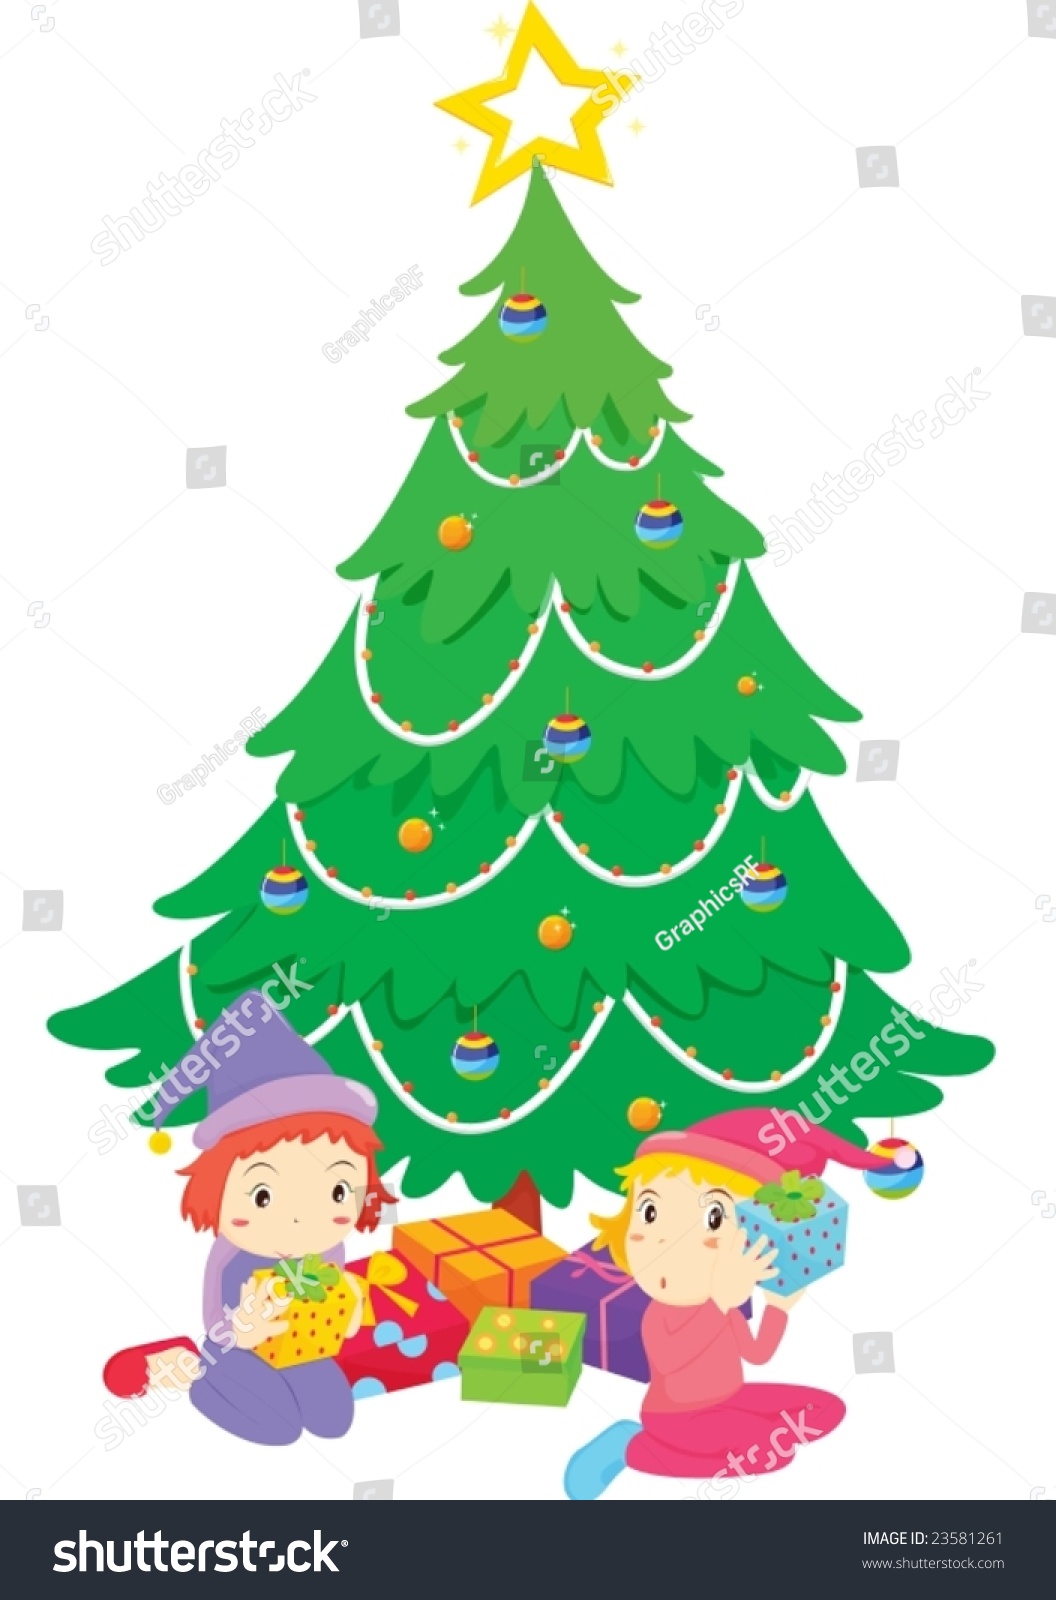 Illustration Of Children With Presents Under The Christmas Tree